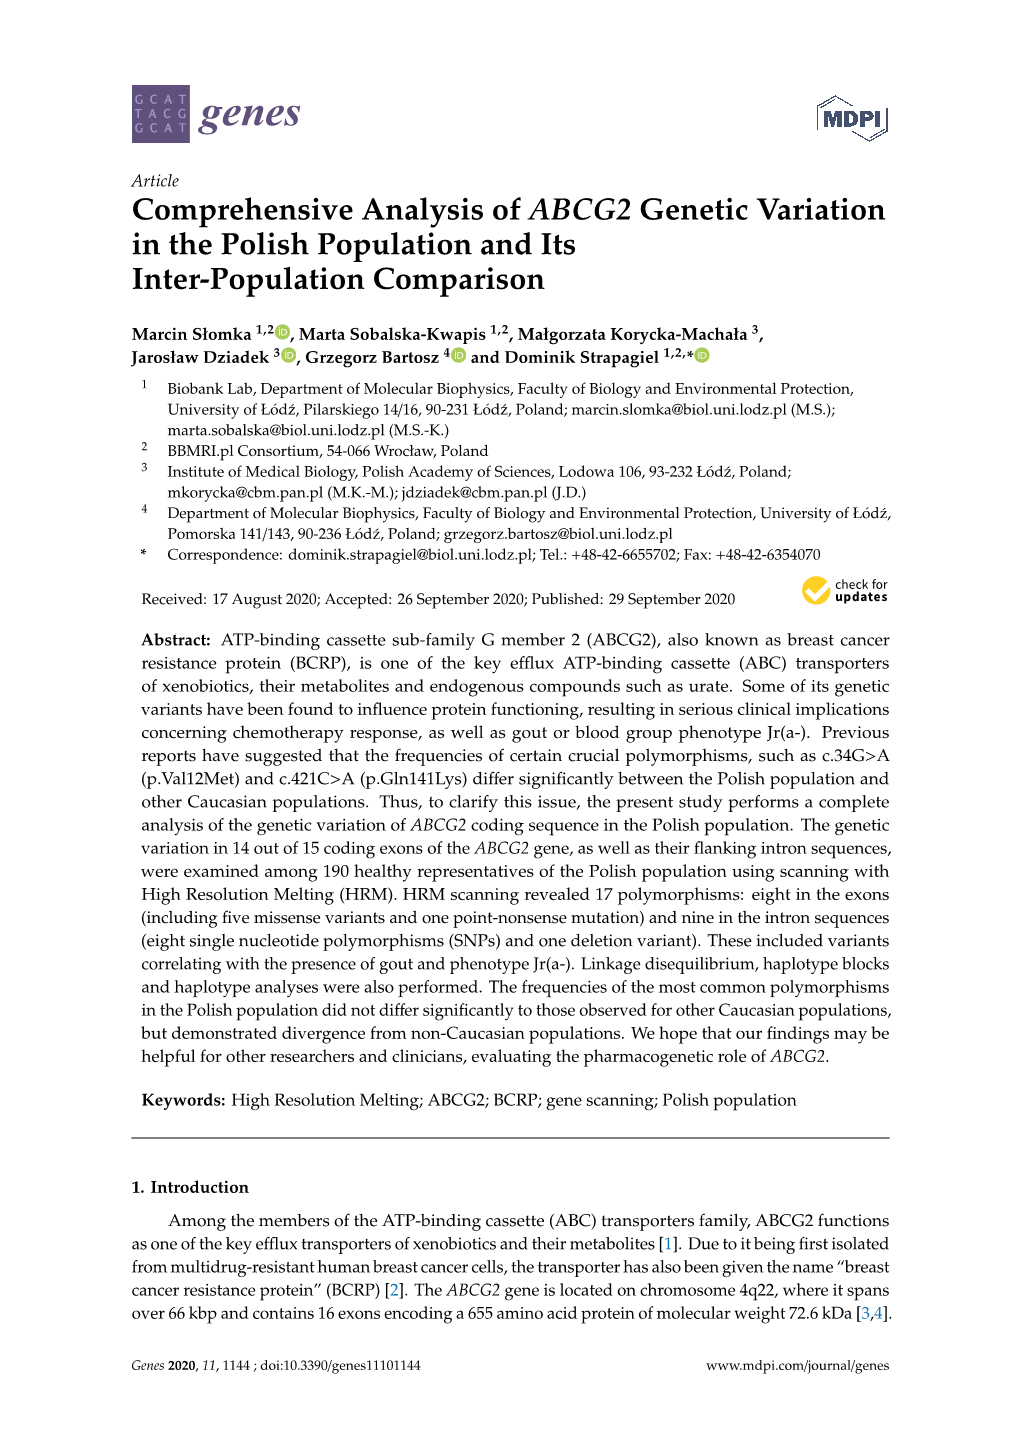 Comprehensive Analysis of ABCG2 Genetic Variation in the Polish Population and Its Inter-Population Comparison